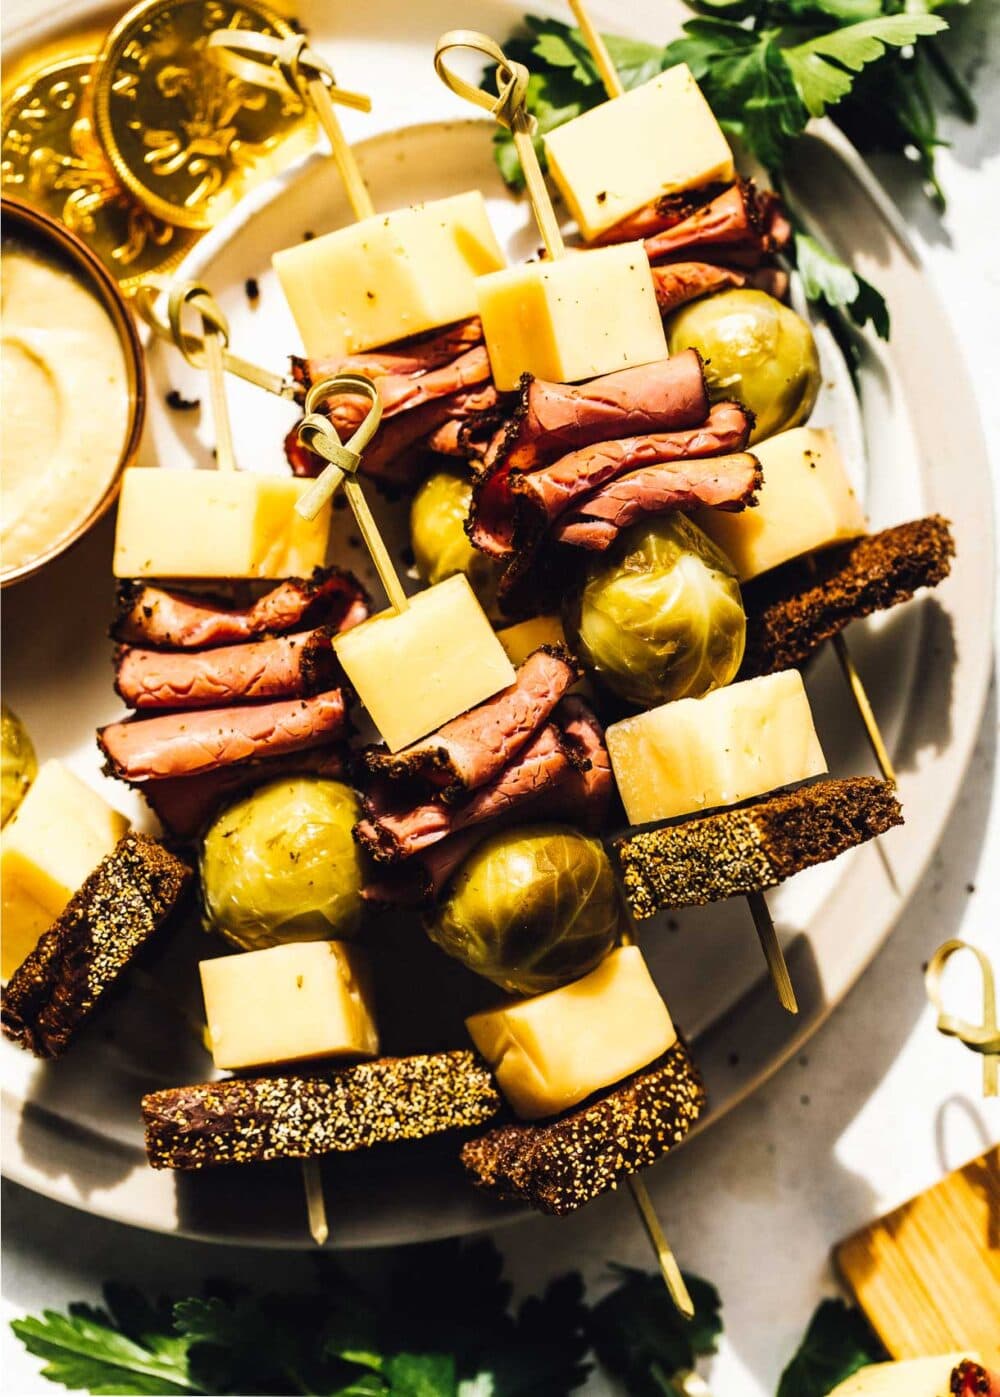 pickled brussels sprouts, cheese, pastrami and rye bread on skewers